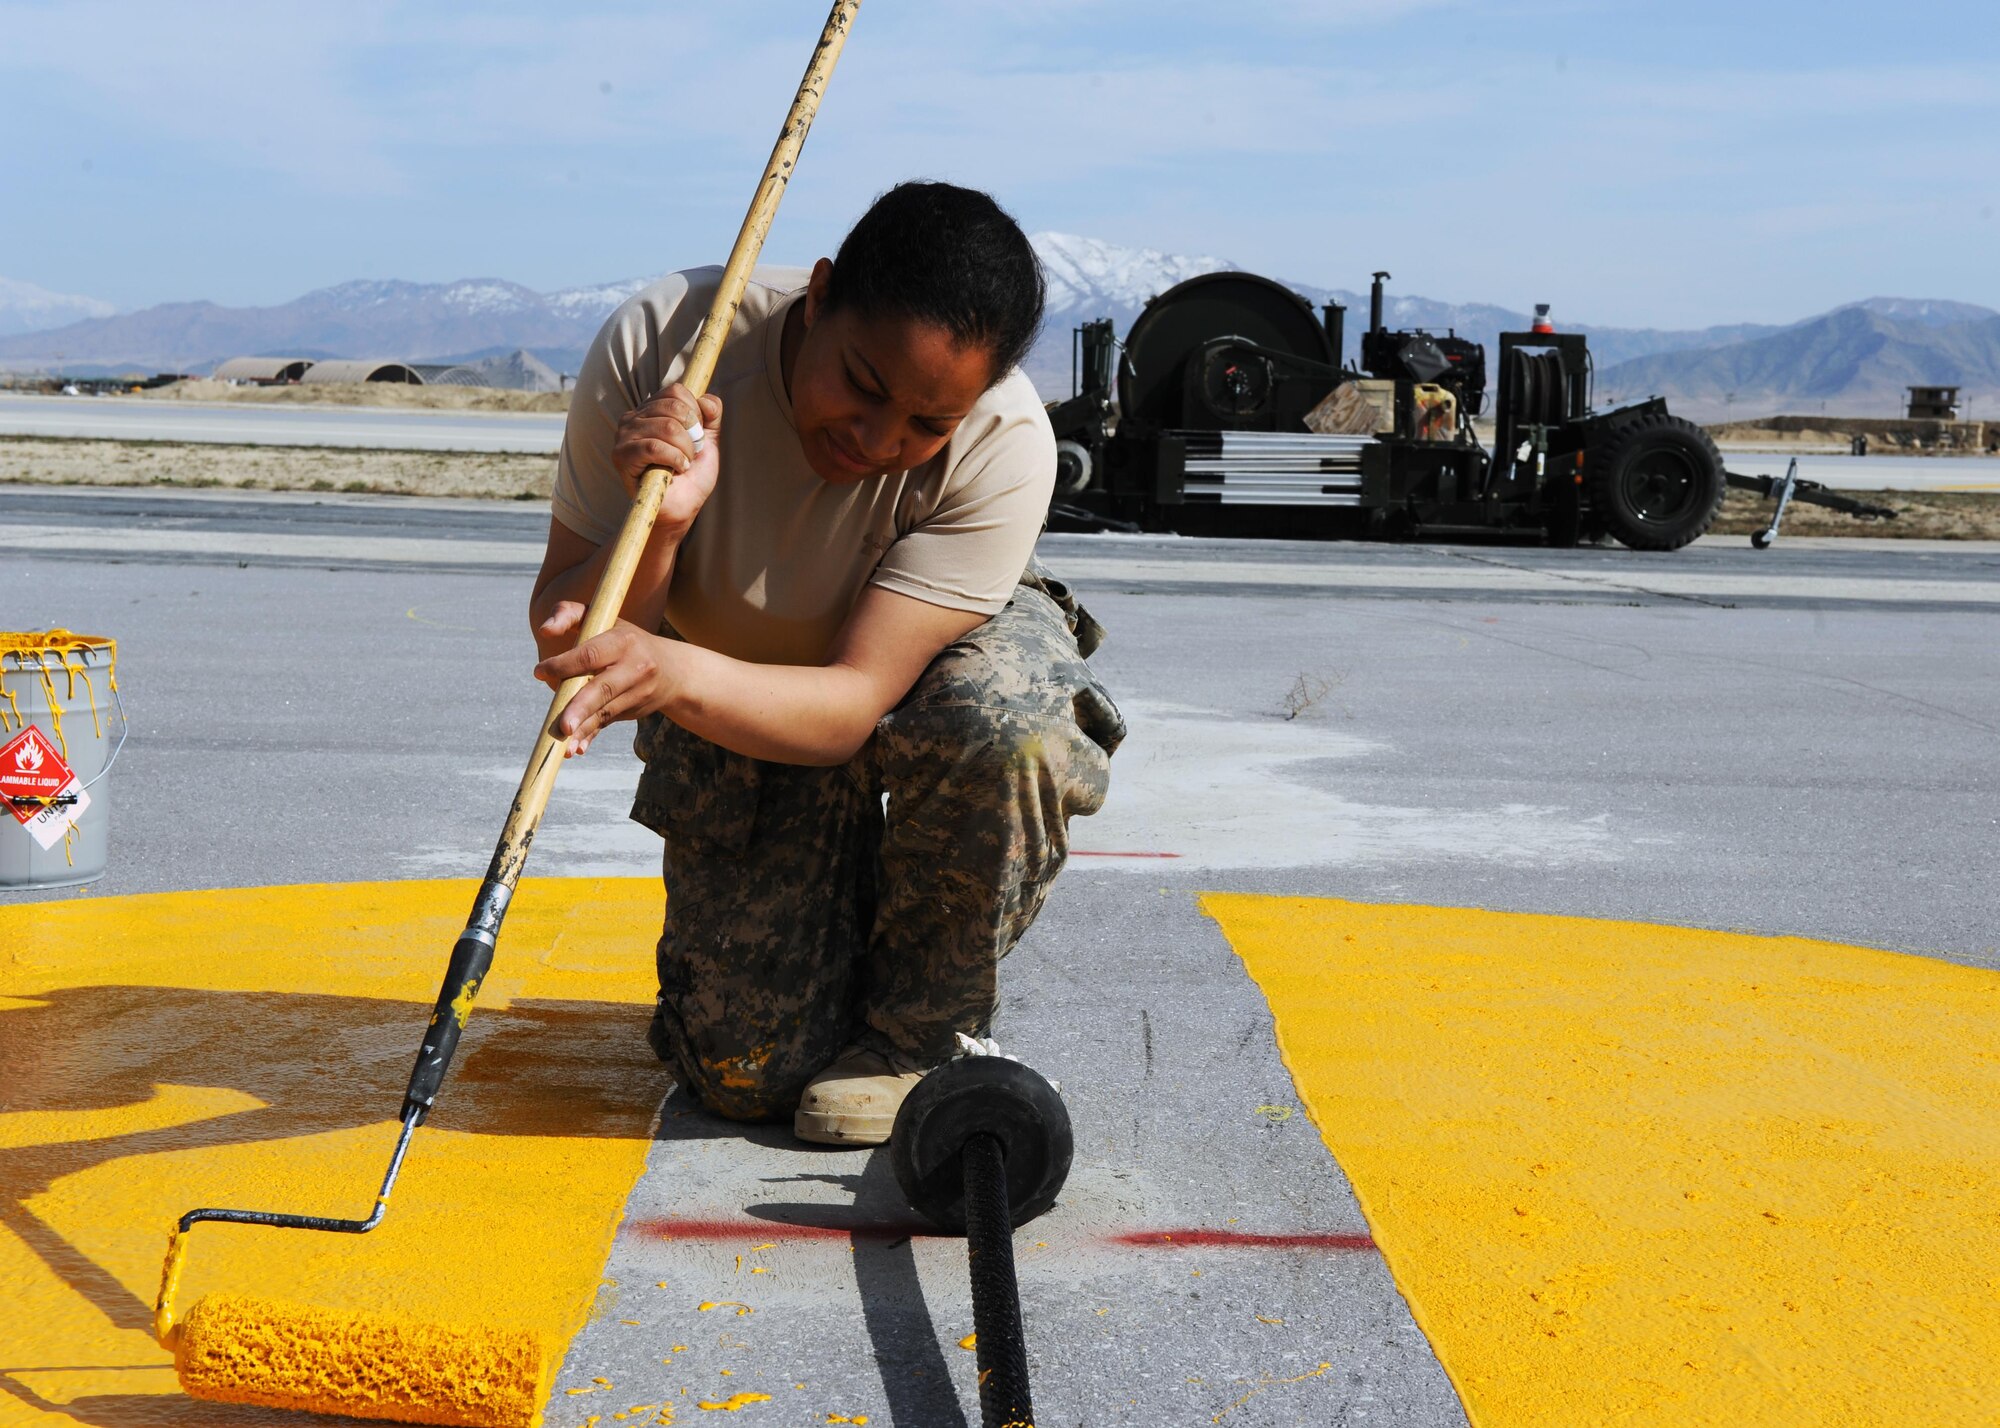 U.S. Air Force Senior Airman Ariel Graham, 455th Expeditionary Civil Engineer Squadron force protection, paints runway markers on a flightline March 18, 2015 at Bagram Airfield, Afghanistan. The markers were painted on Taxiway Zulu as part of its conversion from a taxiway to a runway. (U.S. Air Force photo by Staff Sgt. Whitney Amstutz/released)